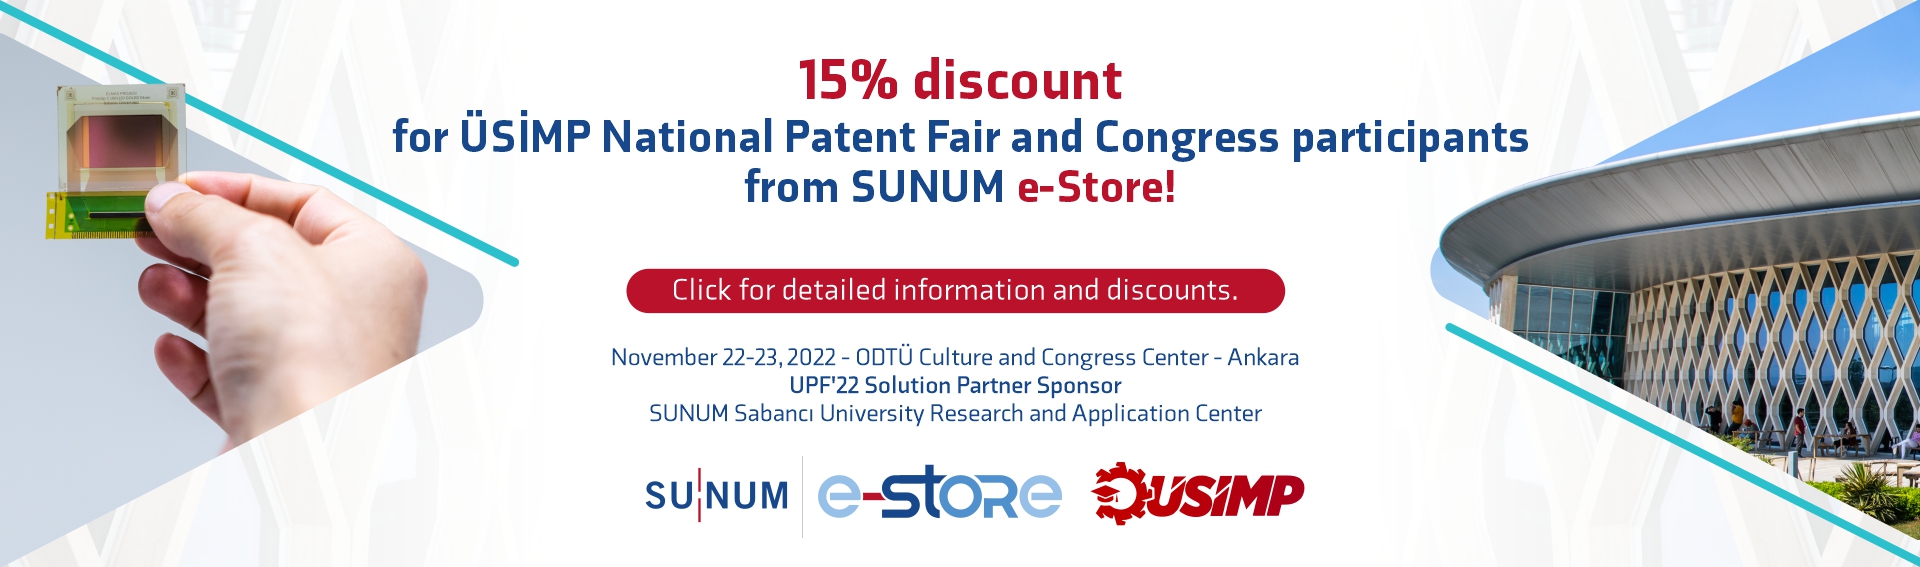 15% discount for ÜSİMP National Patent Fair and Congress participants from SUNUM e-Store